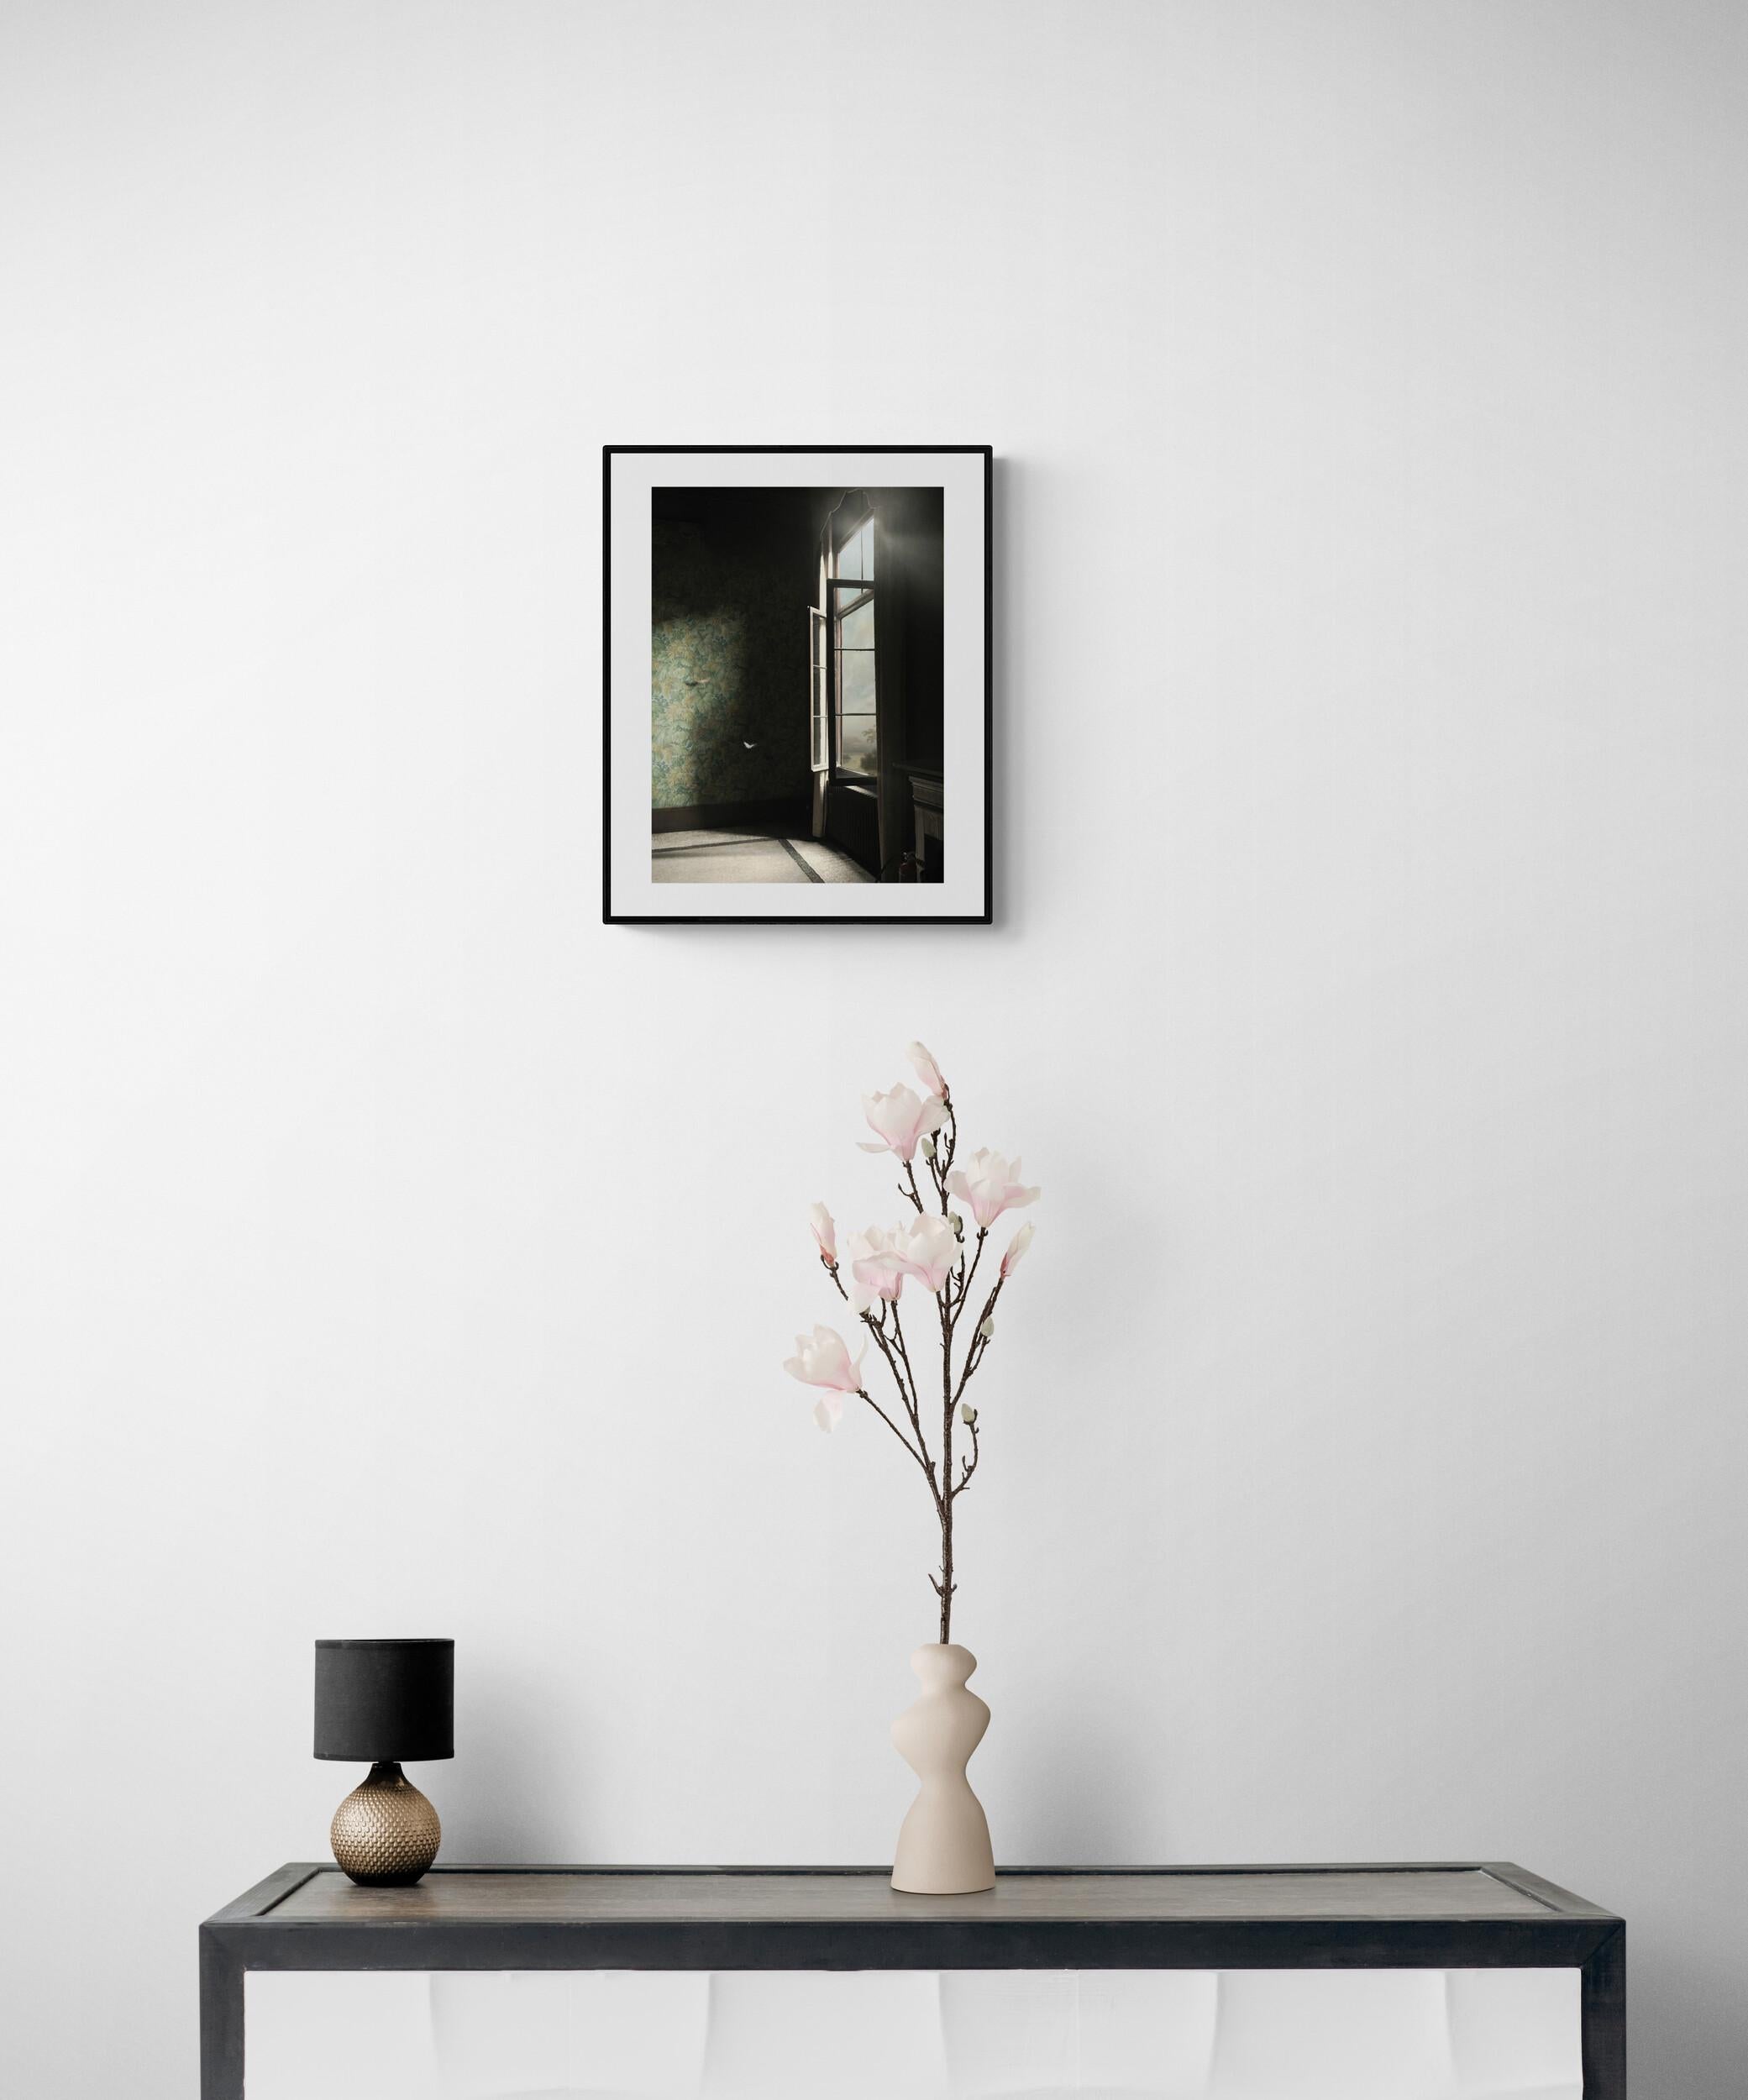 Entrance VIII - Interior Photography, Photomontage, Film-making - Contemporary Print by Suzanne Moxhay